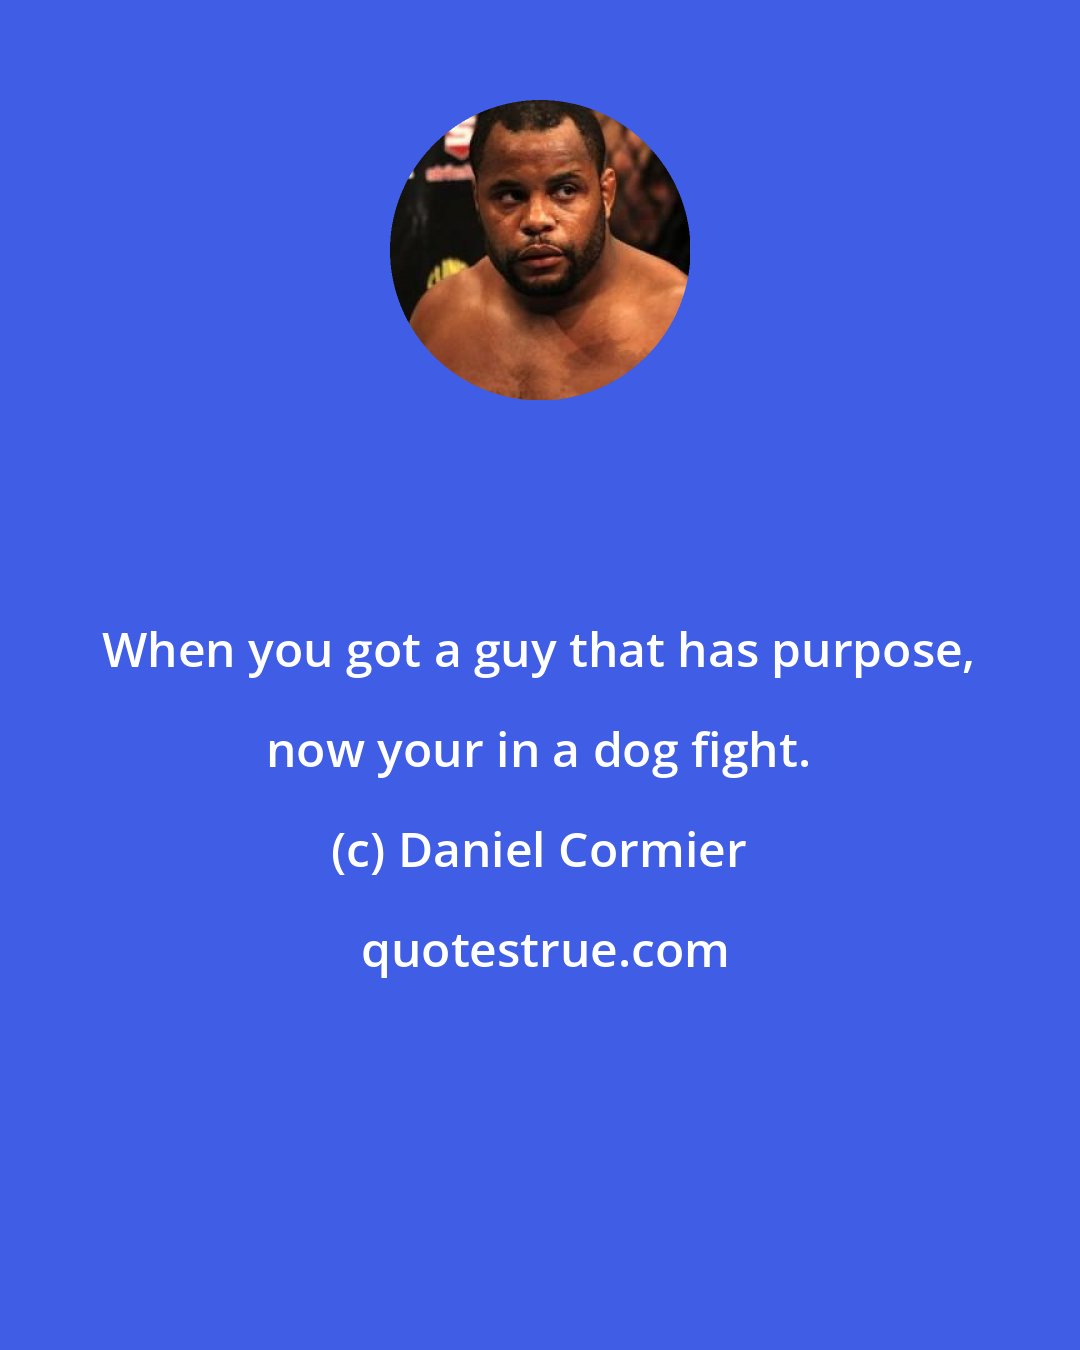 Daniel Cormier: When you got a guy that has purpose, now your in a dog fight.